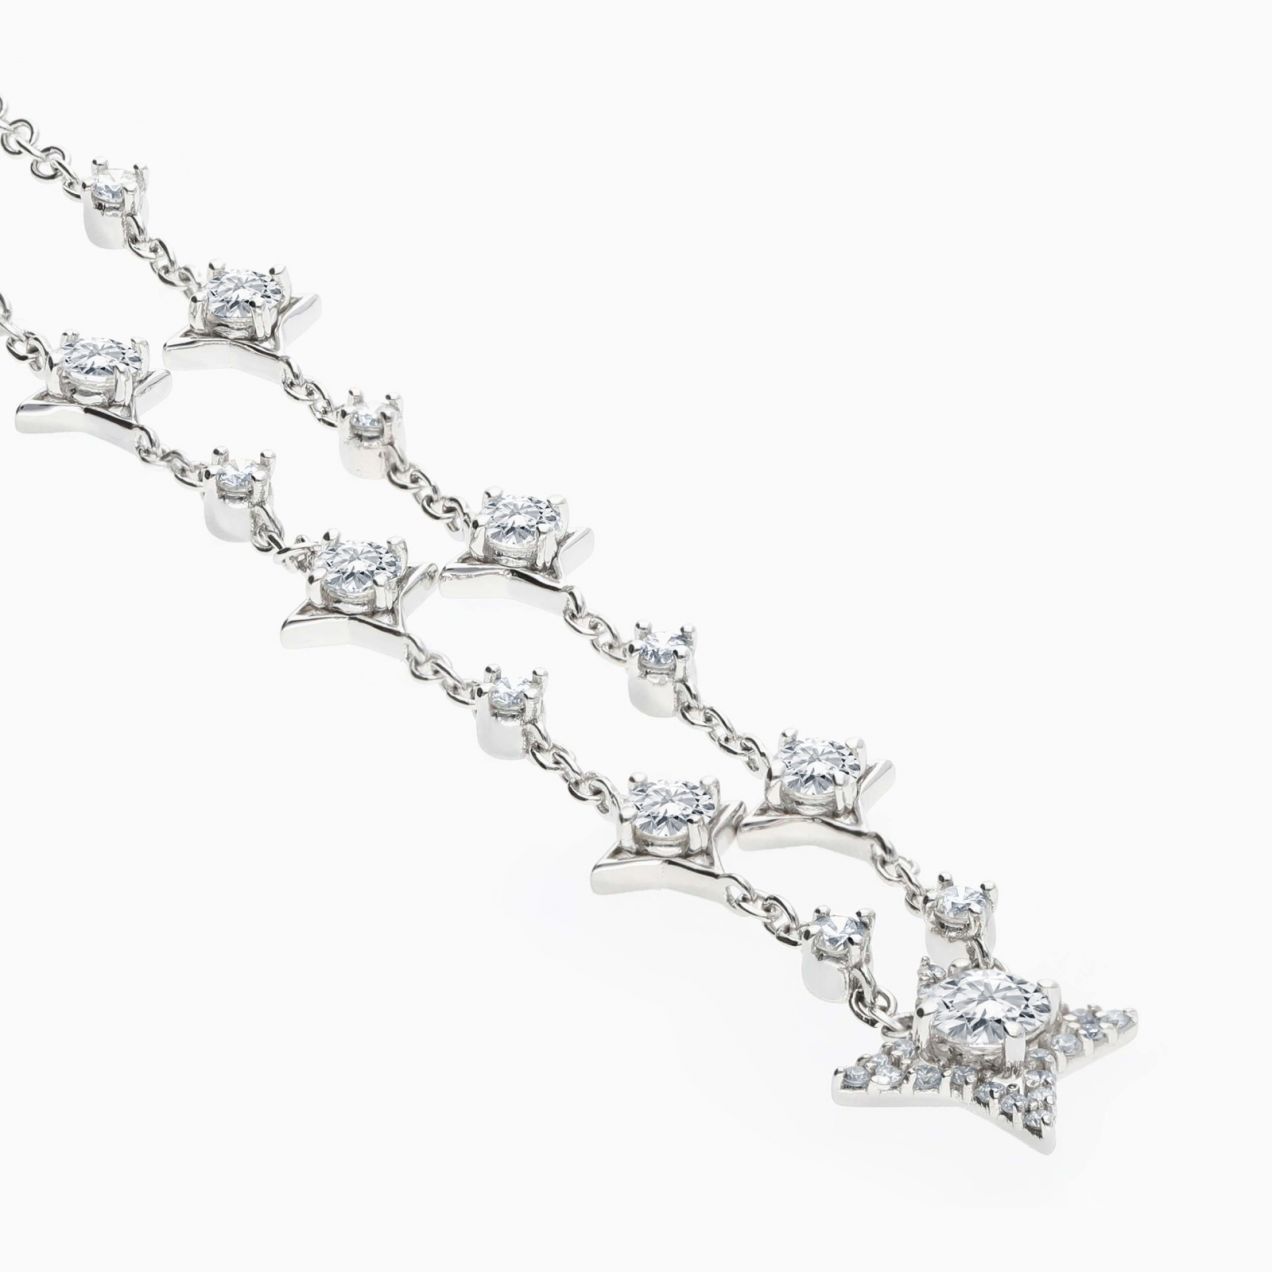 Star necklace in white gold with diamonds and diamond halo